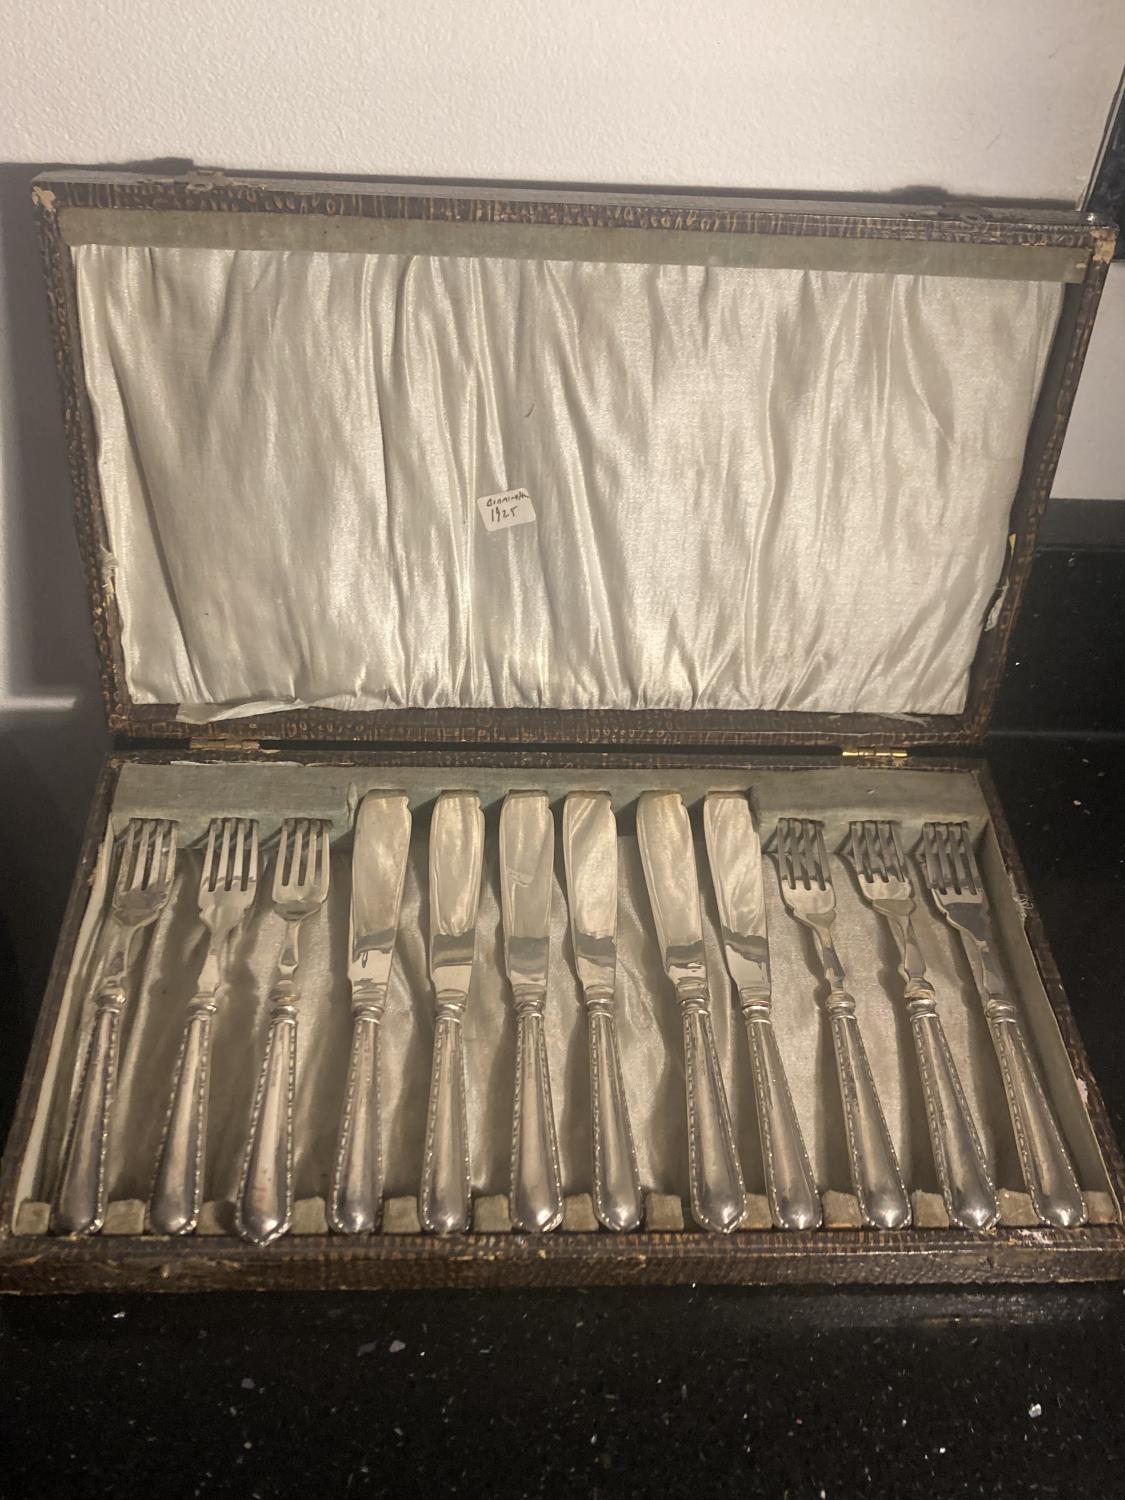 A SET OF HALLMARKED 1925 BIRMINGHAM SILVER FISH KNIVES AND FORKS IN A PRESENTATION BOX